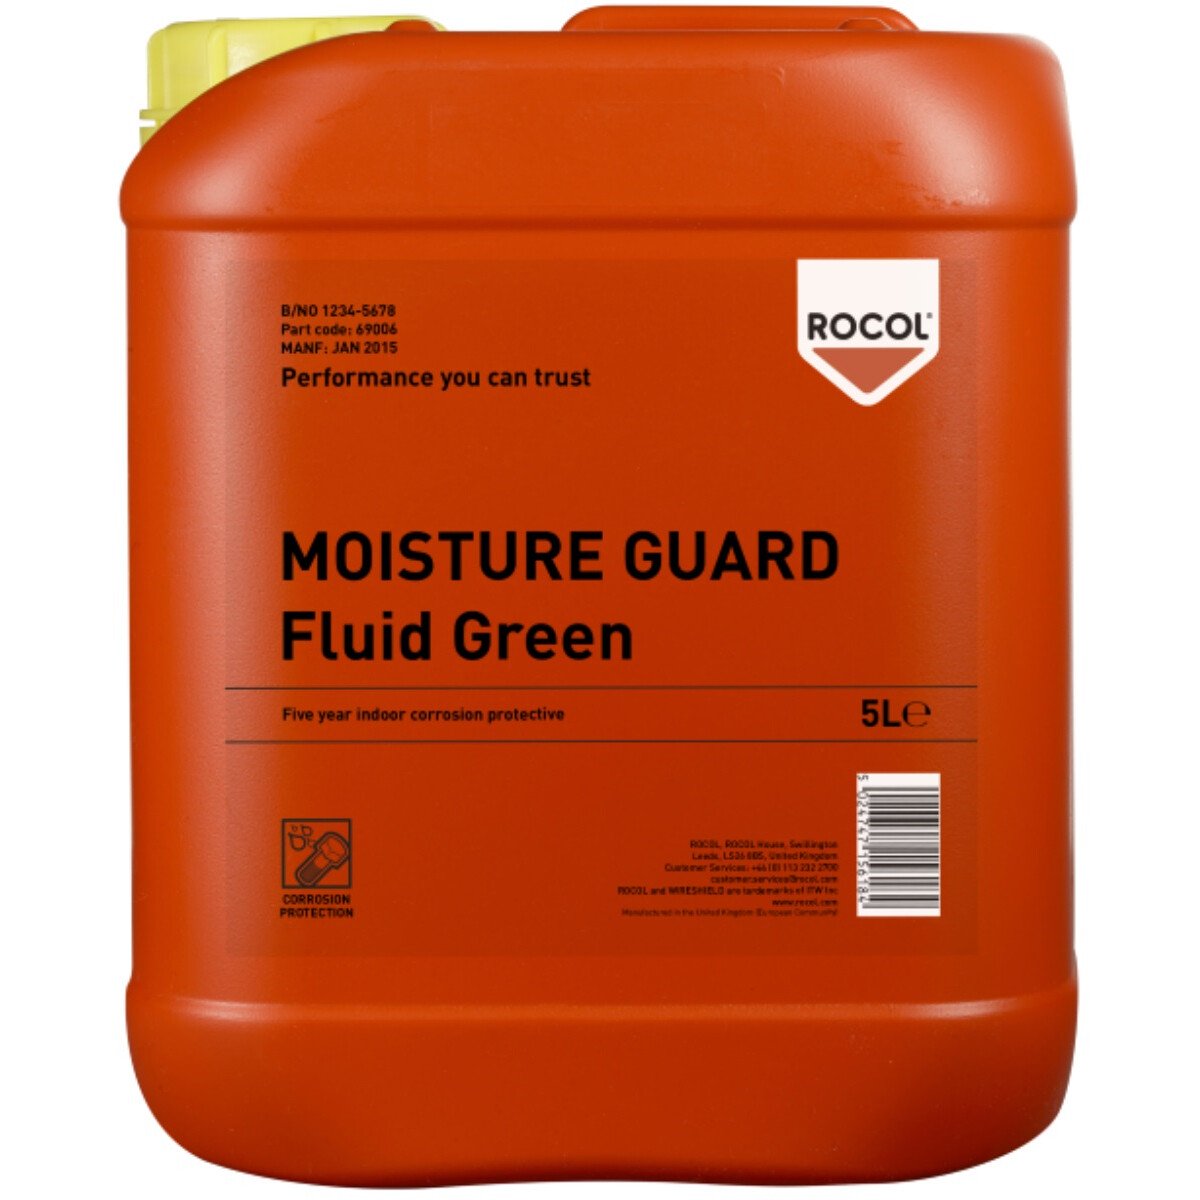 Rocol 69006 MOISTURE GUARD GREEN FLUID Indoor Corrosion Protection for Moulds and Metals 5ltr